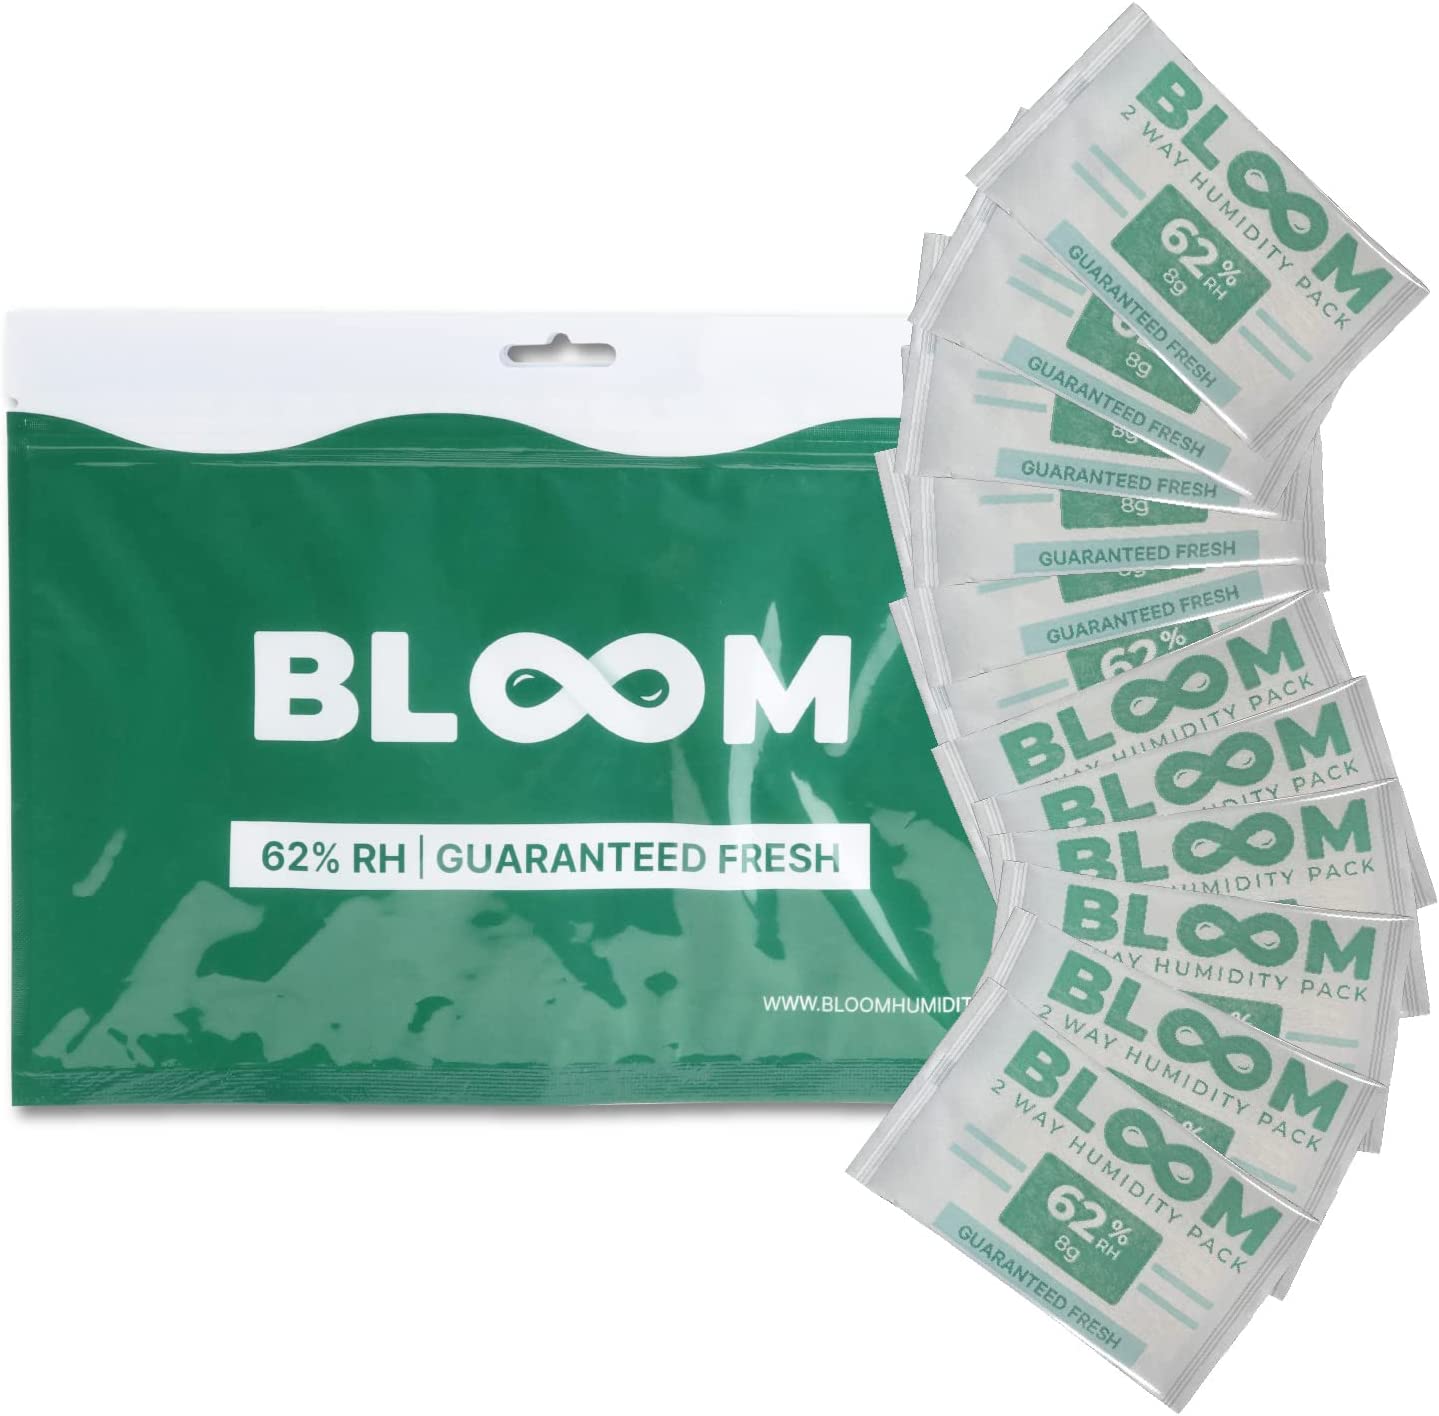 Bloom Humidity Packs and Revival Packs (8g) – Herb Guard